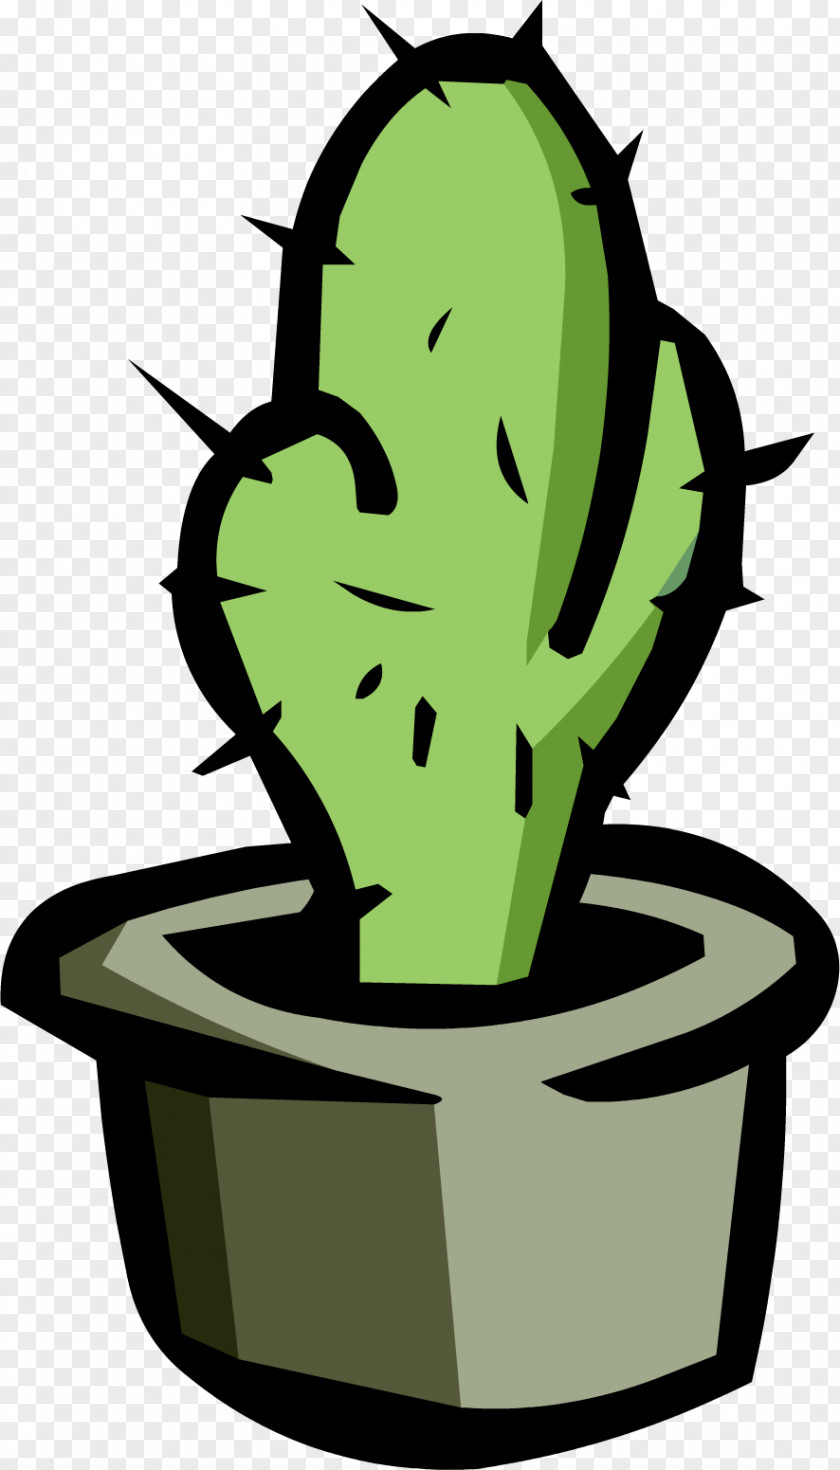 Cactus Image Resident Evil 7: Not A Hero Cactaceae PNG